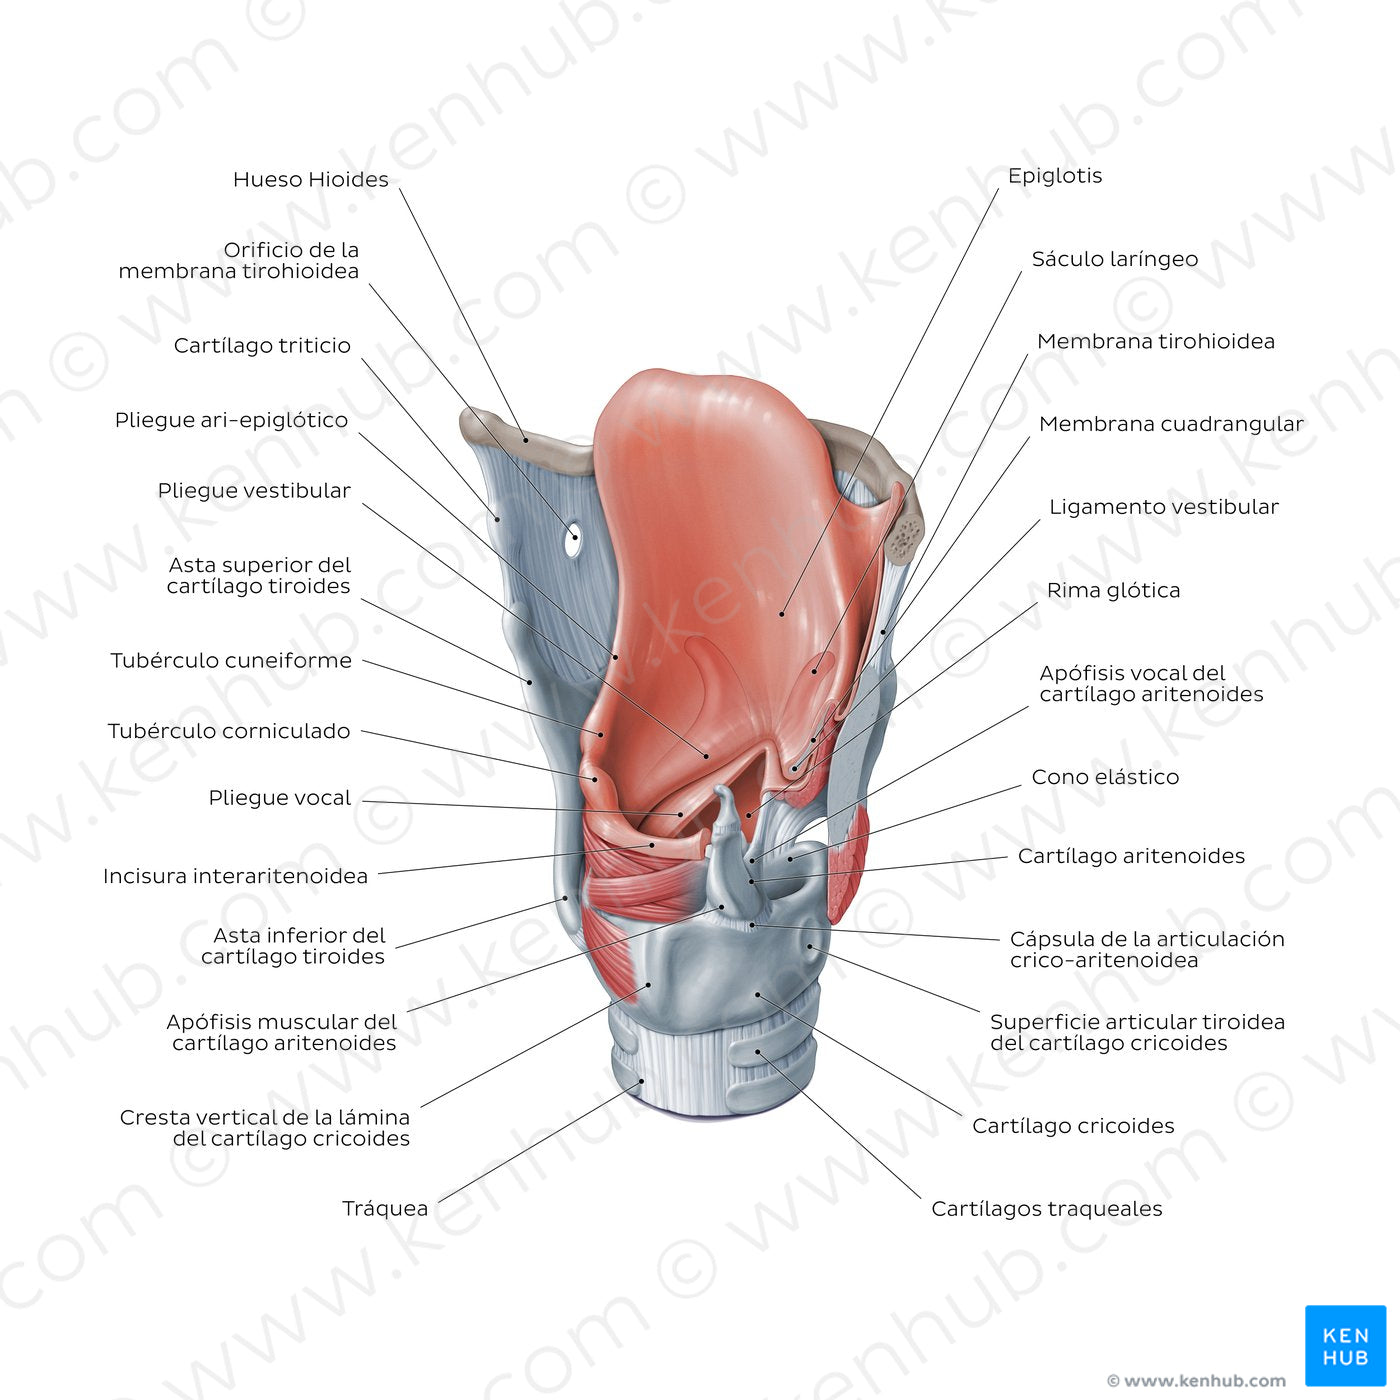 Structure of the larynx: posterolateral view (Spanish)